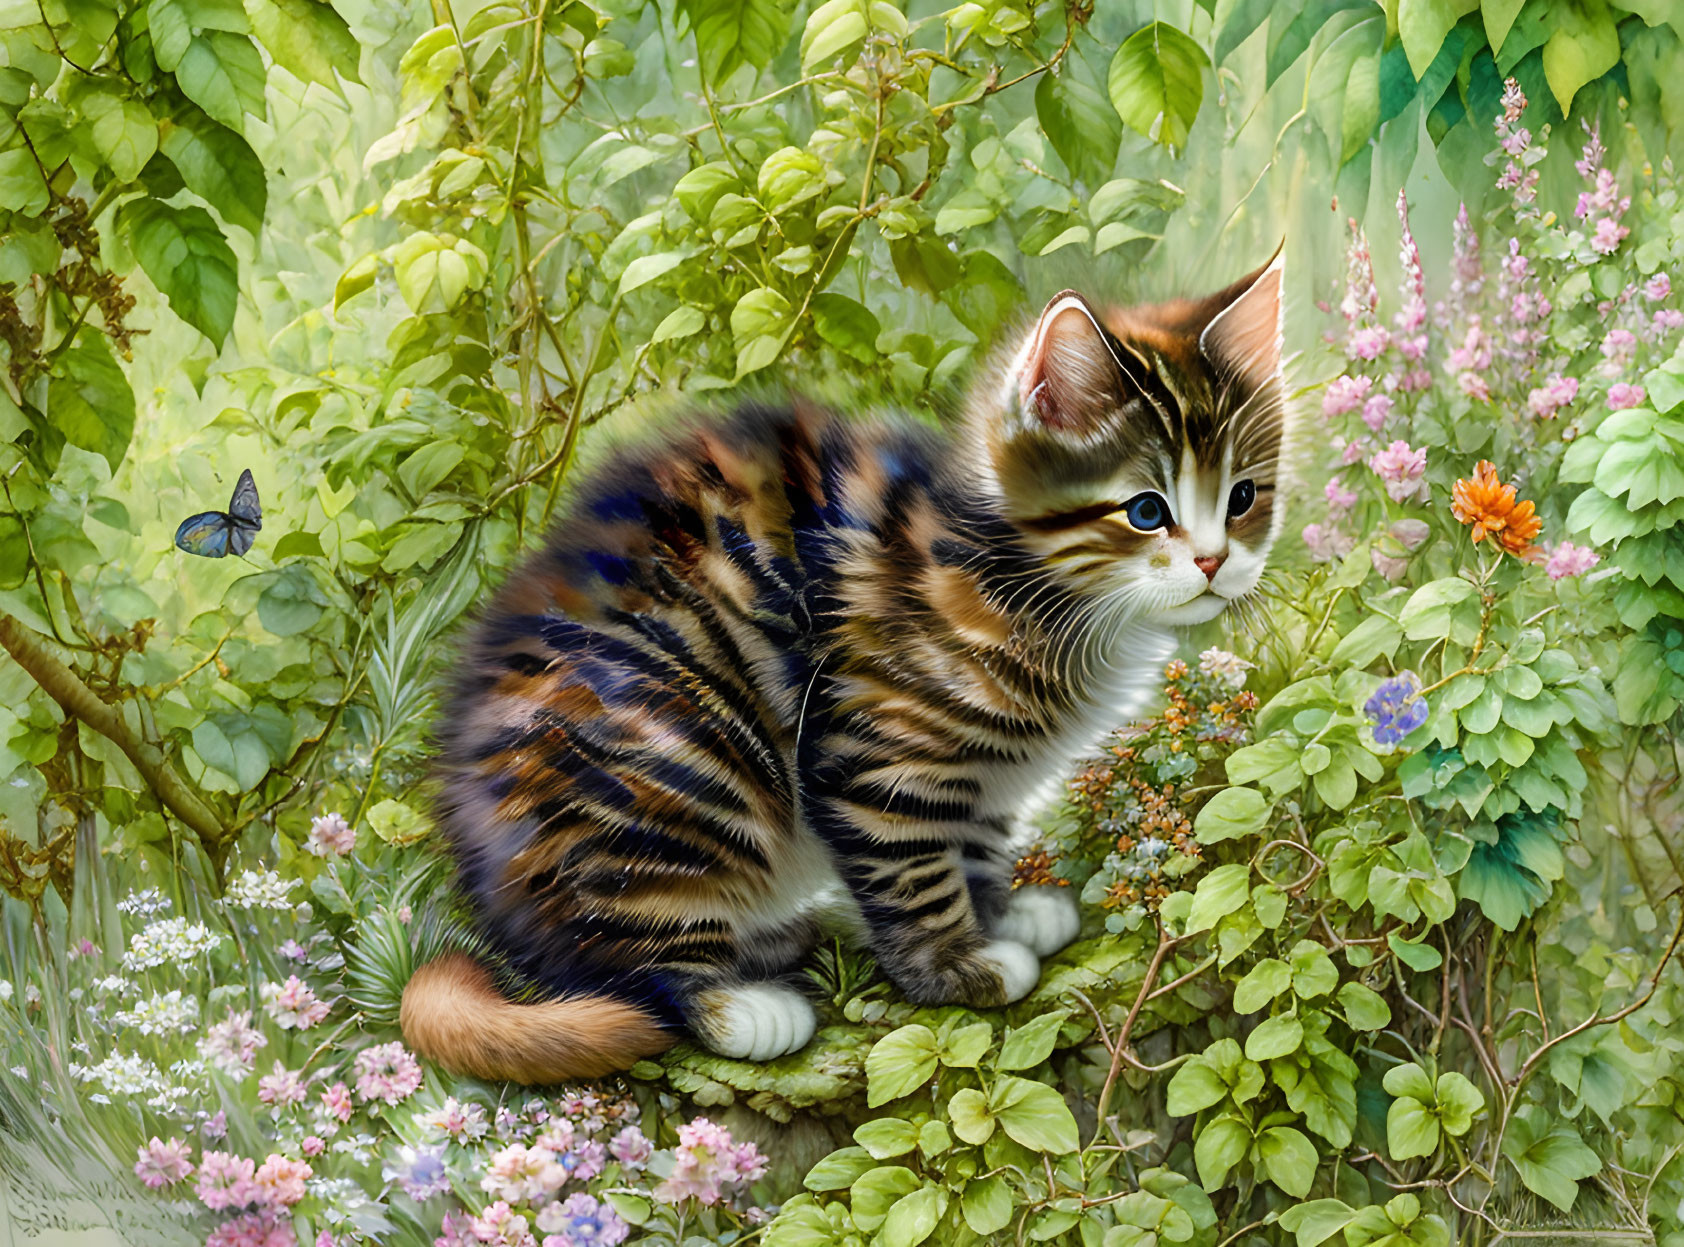 Colorful painting of kitten with stripes in lush greenery and flowers.